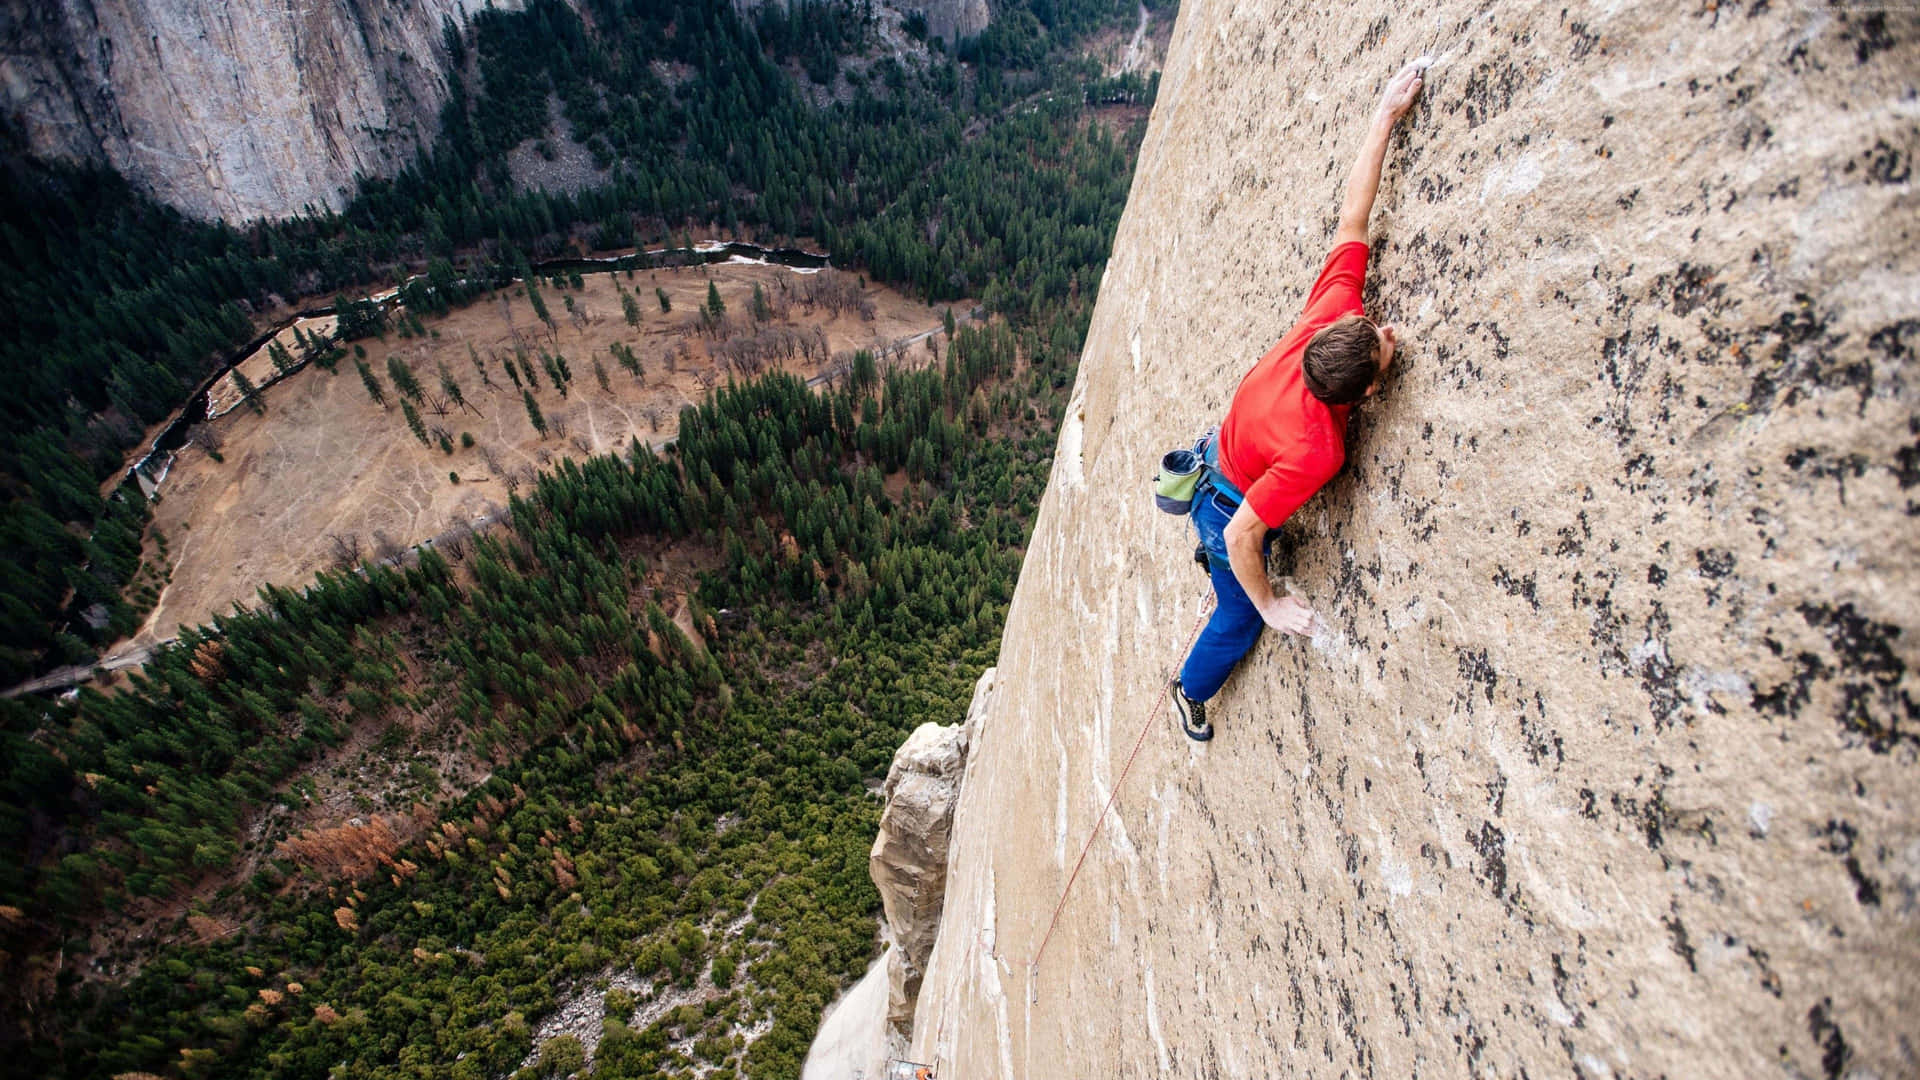 Reaching New Heights - Climbing is an Adventurous way to Challenge yourself